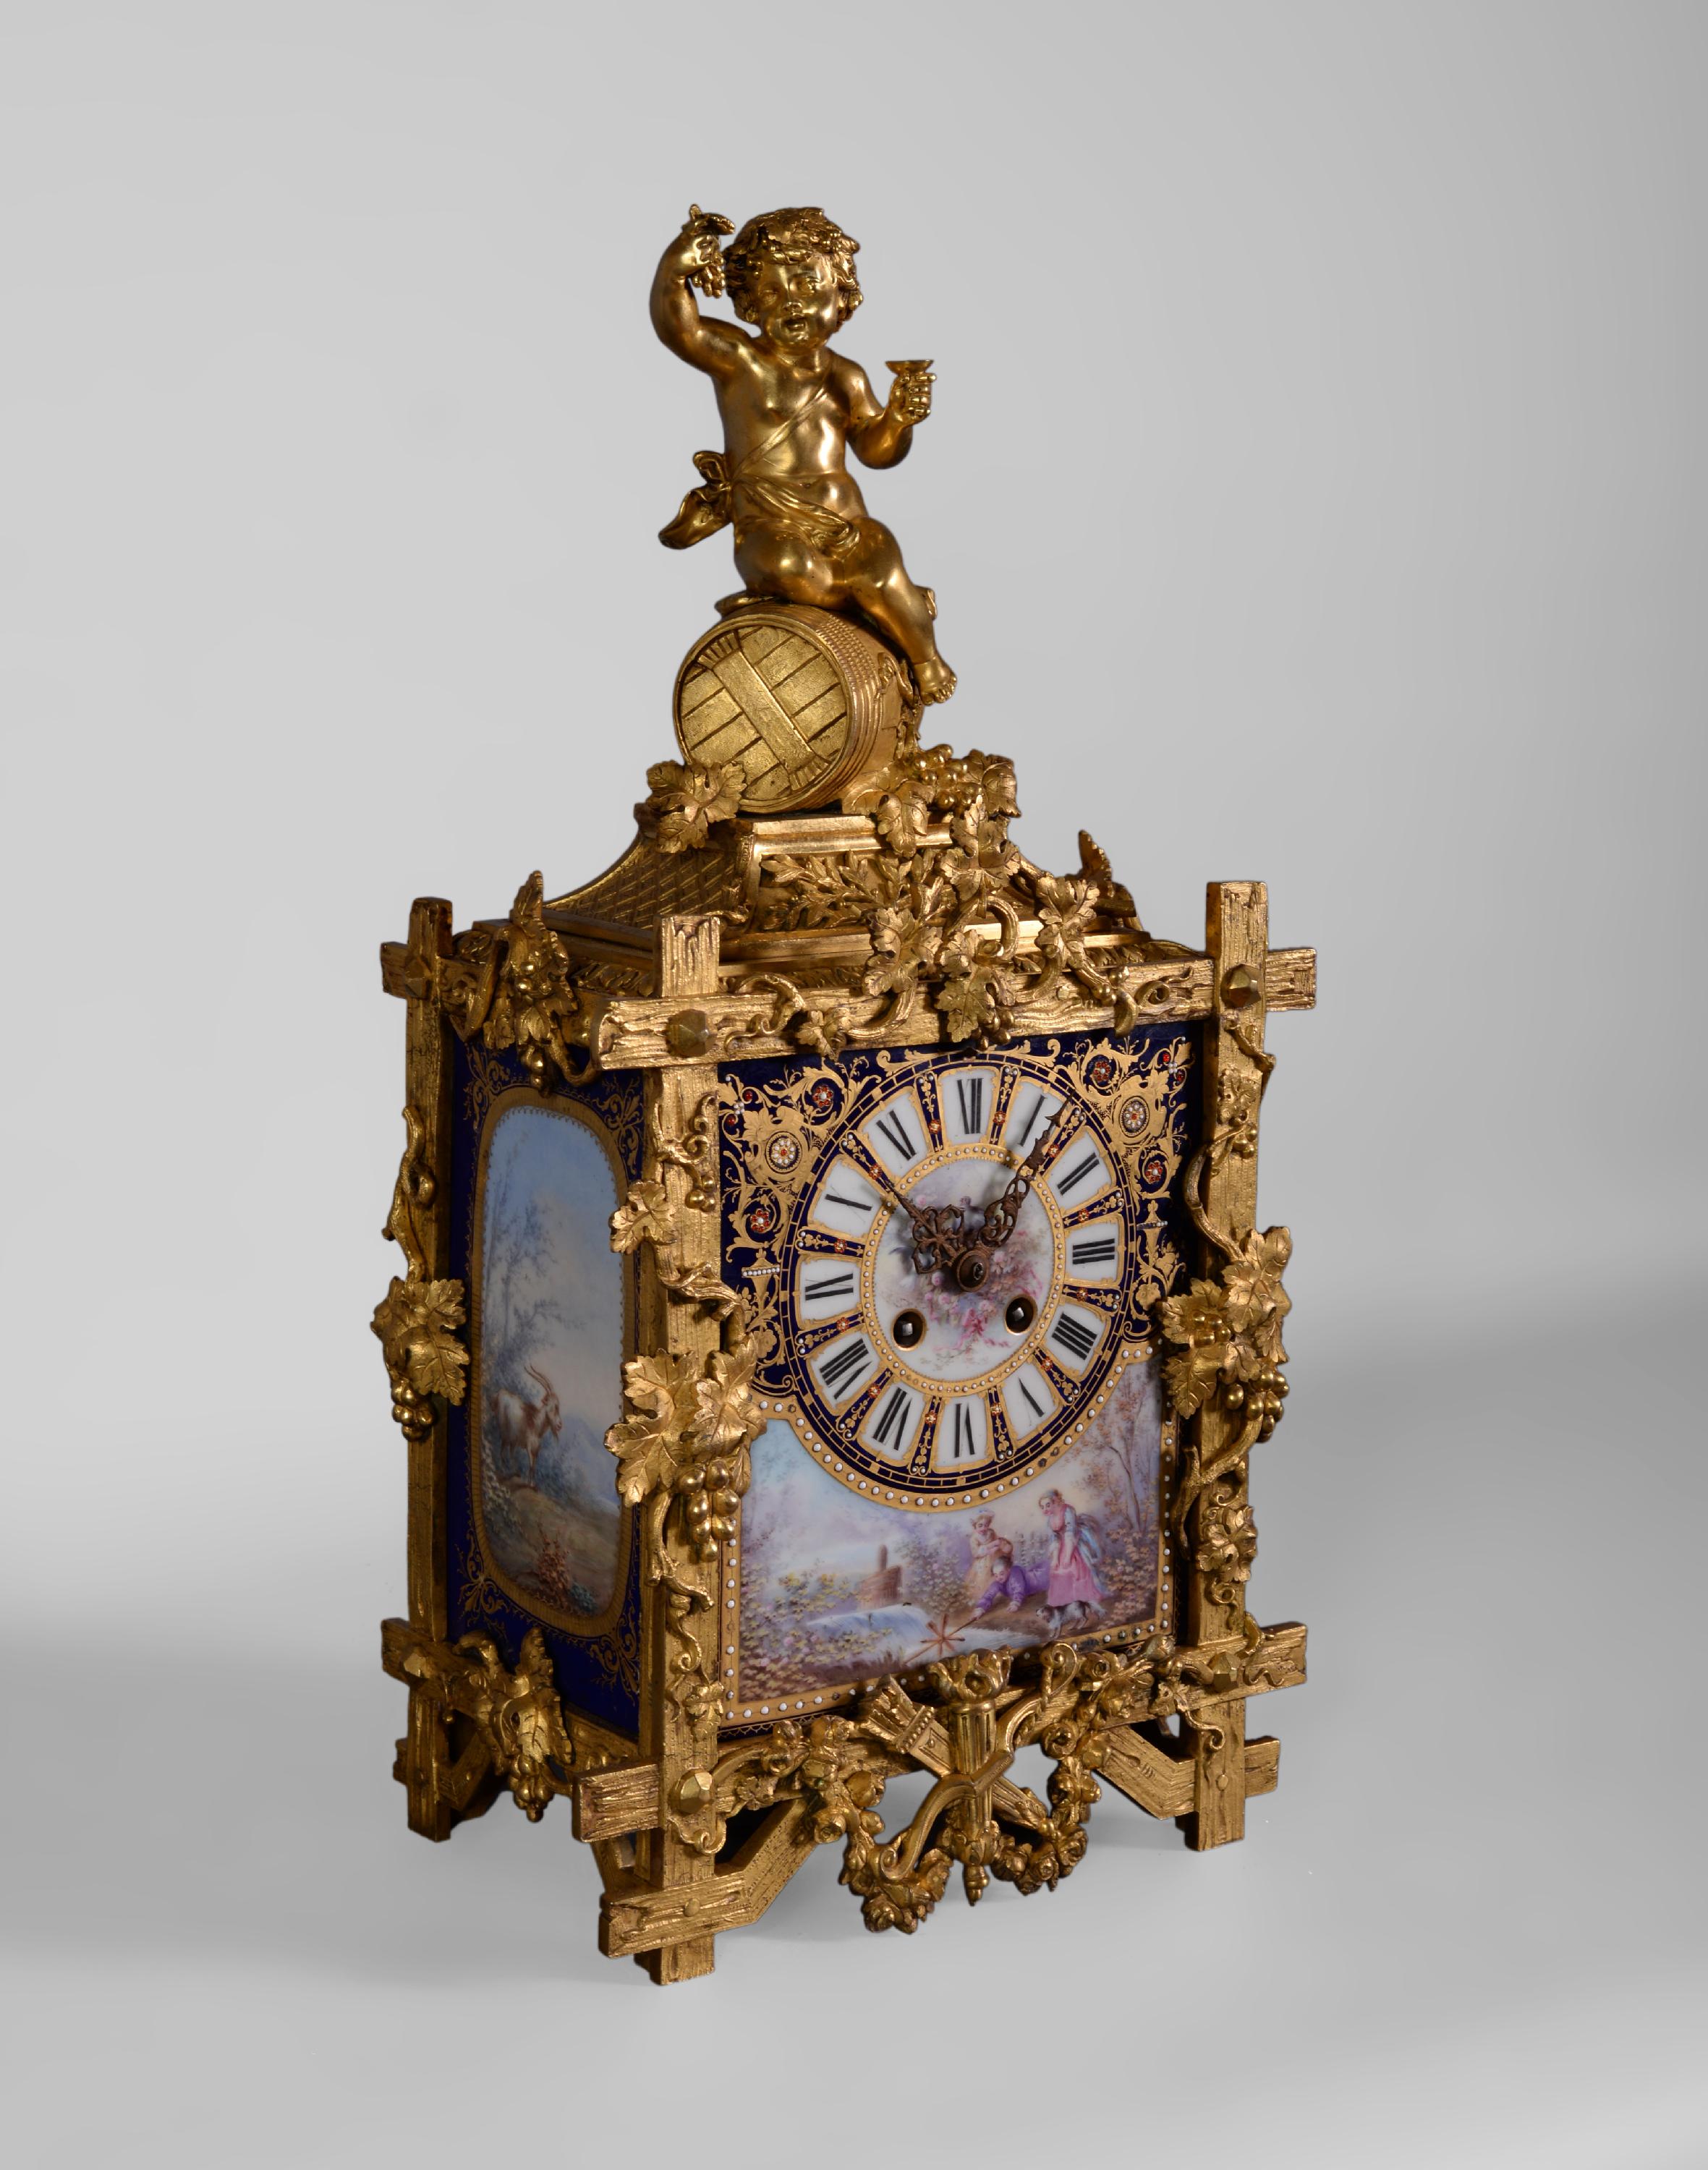 This beautiful clock was made out of porcelain and gilded bronze during Napoleon III period. The porcelain dial indicates the hours with Roman numerals. It is decorated with gilded rinceaux and little enameled pearls. Under the dial, there is an